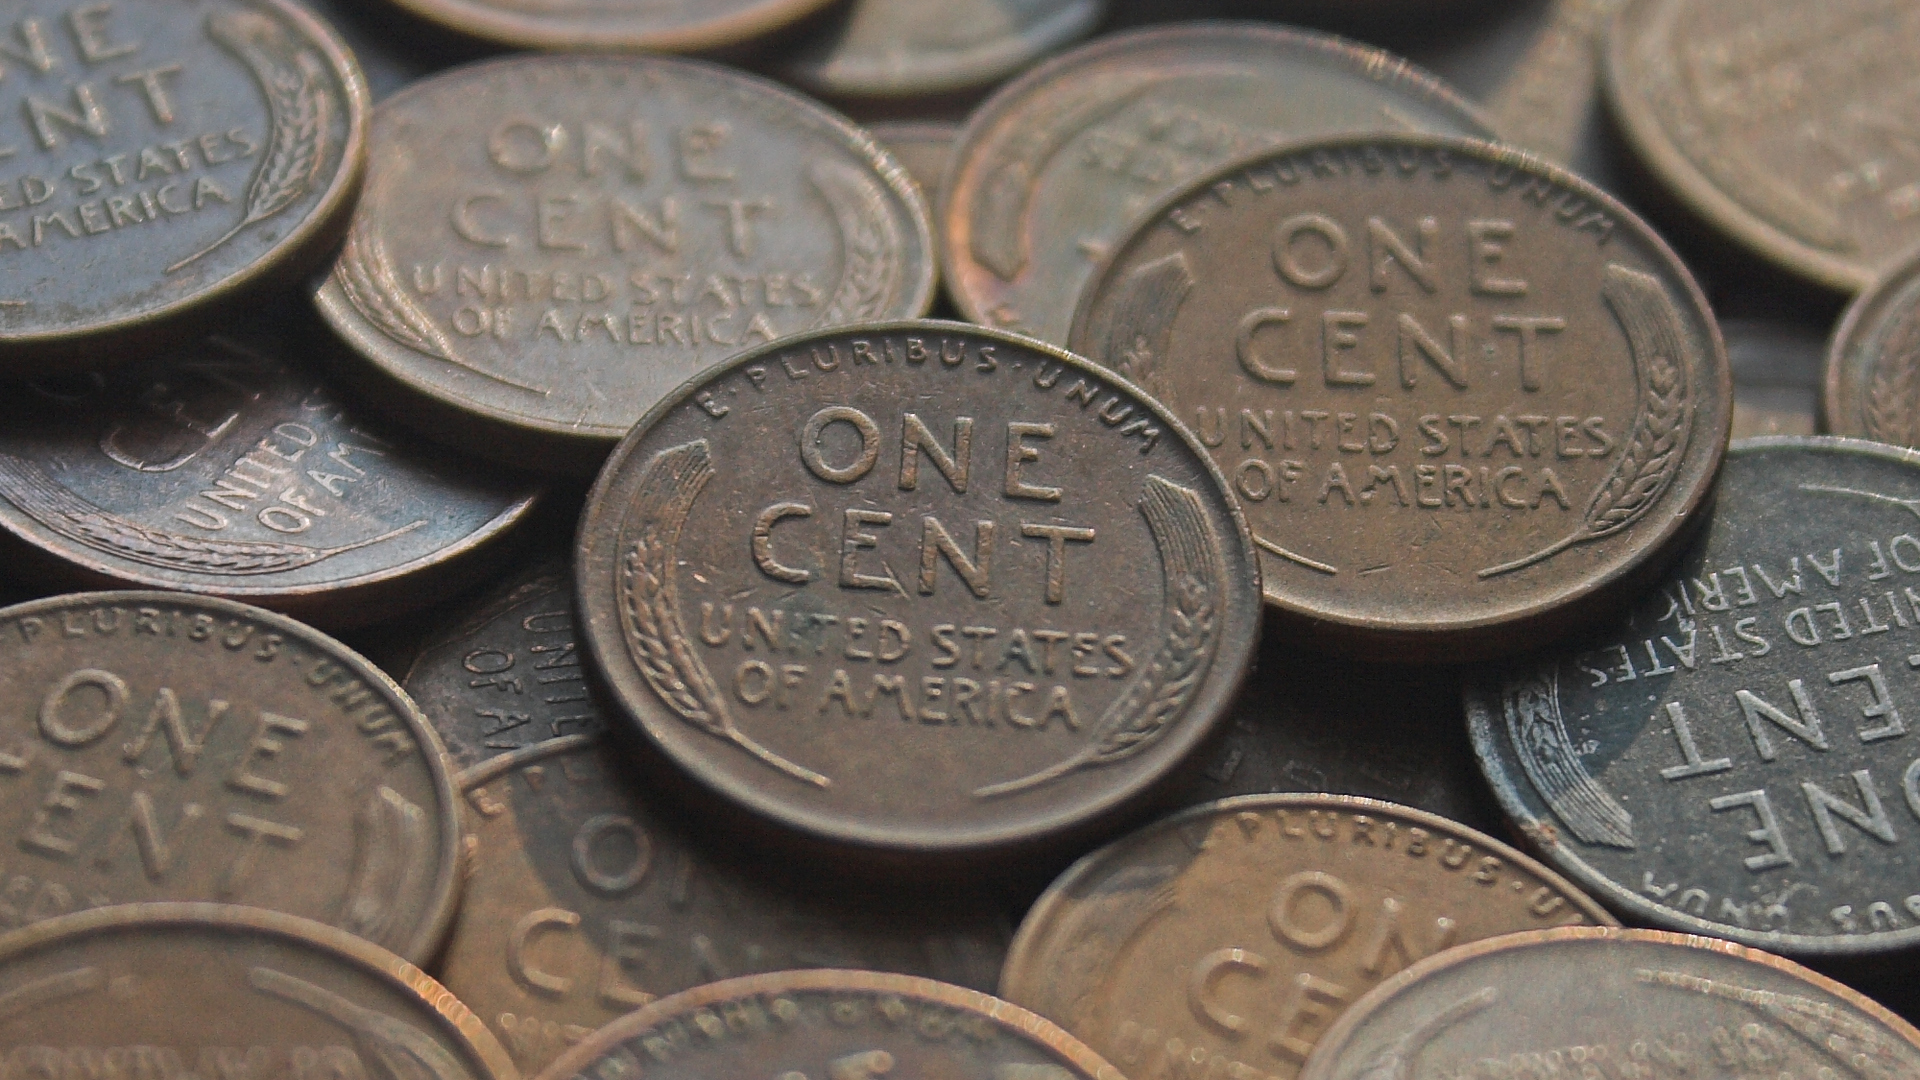 Top 10 Most Valuable Toonies in Circulation - Rare Canadian Coins